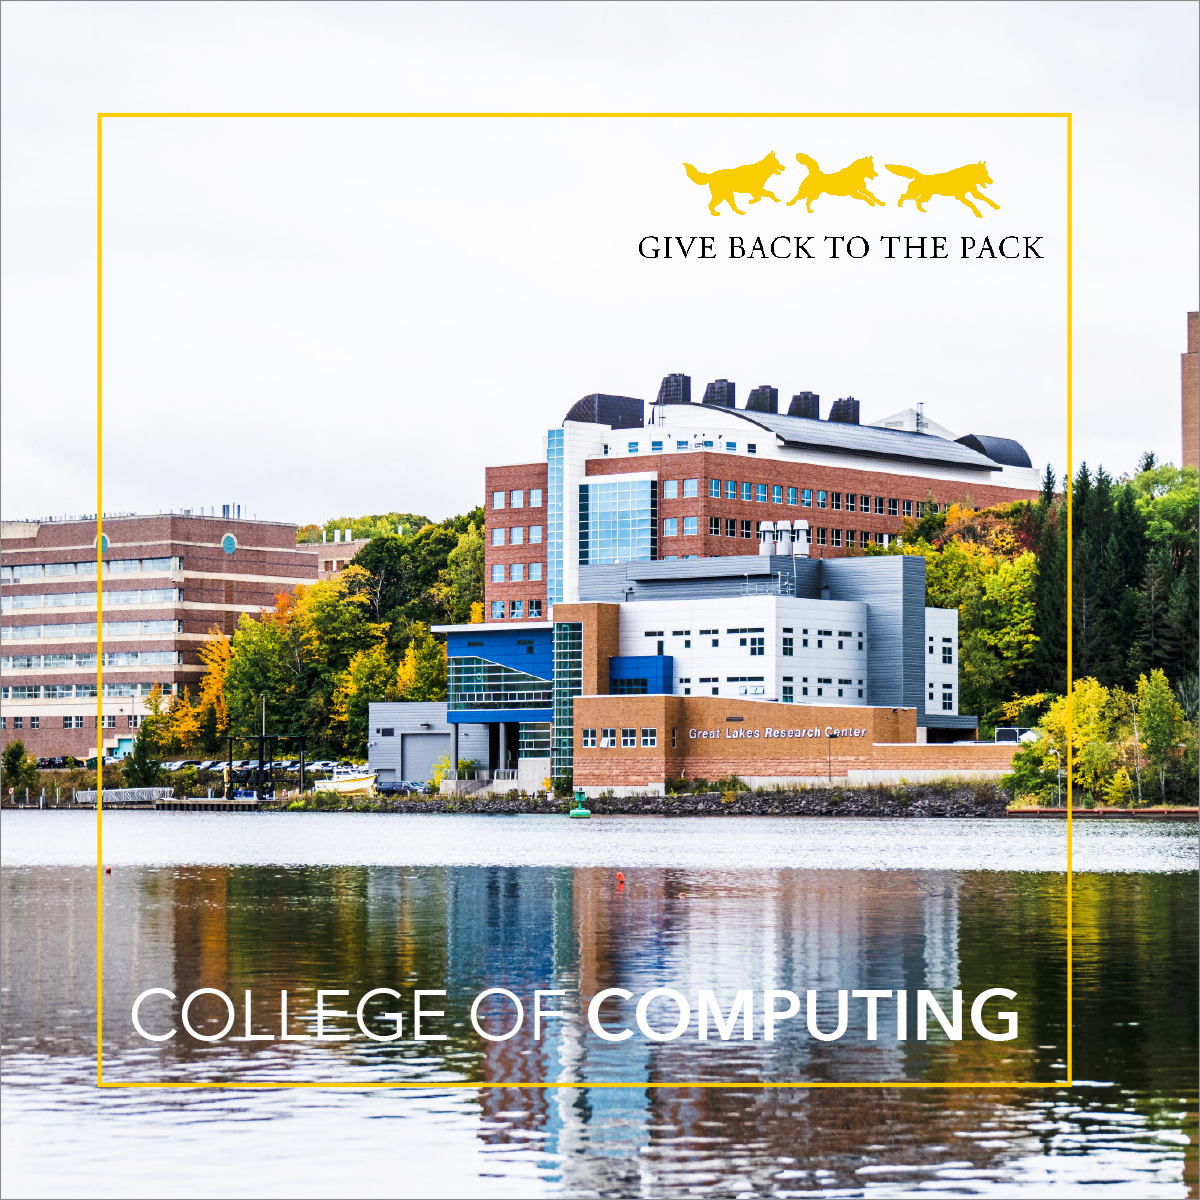 Give Back to the Pack matching gift challenge! For every 5 gifts made to any College of Computing fund, an additional $1,000 from Automation Alley will be released, up to $5,000. Give today. giveback.mtu.edu/amb/comm @michigantech #michigantech #computing